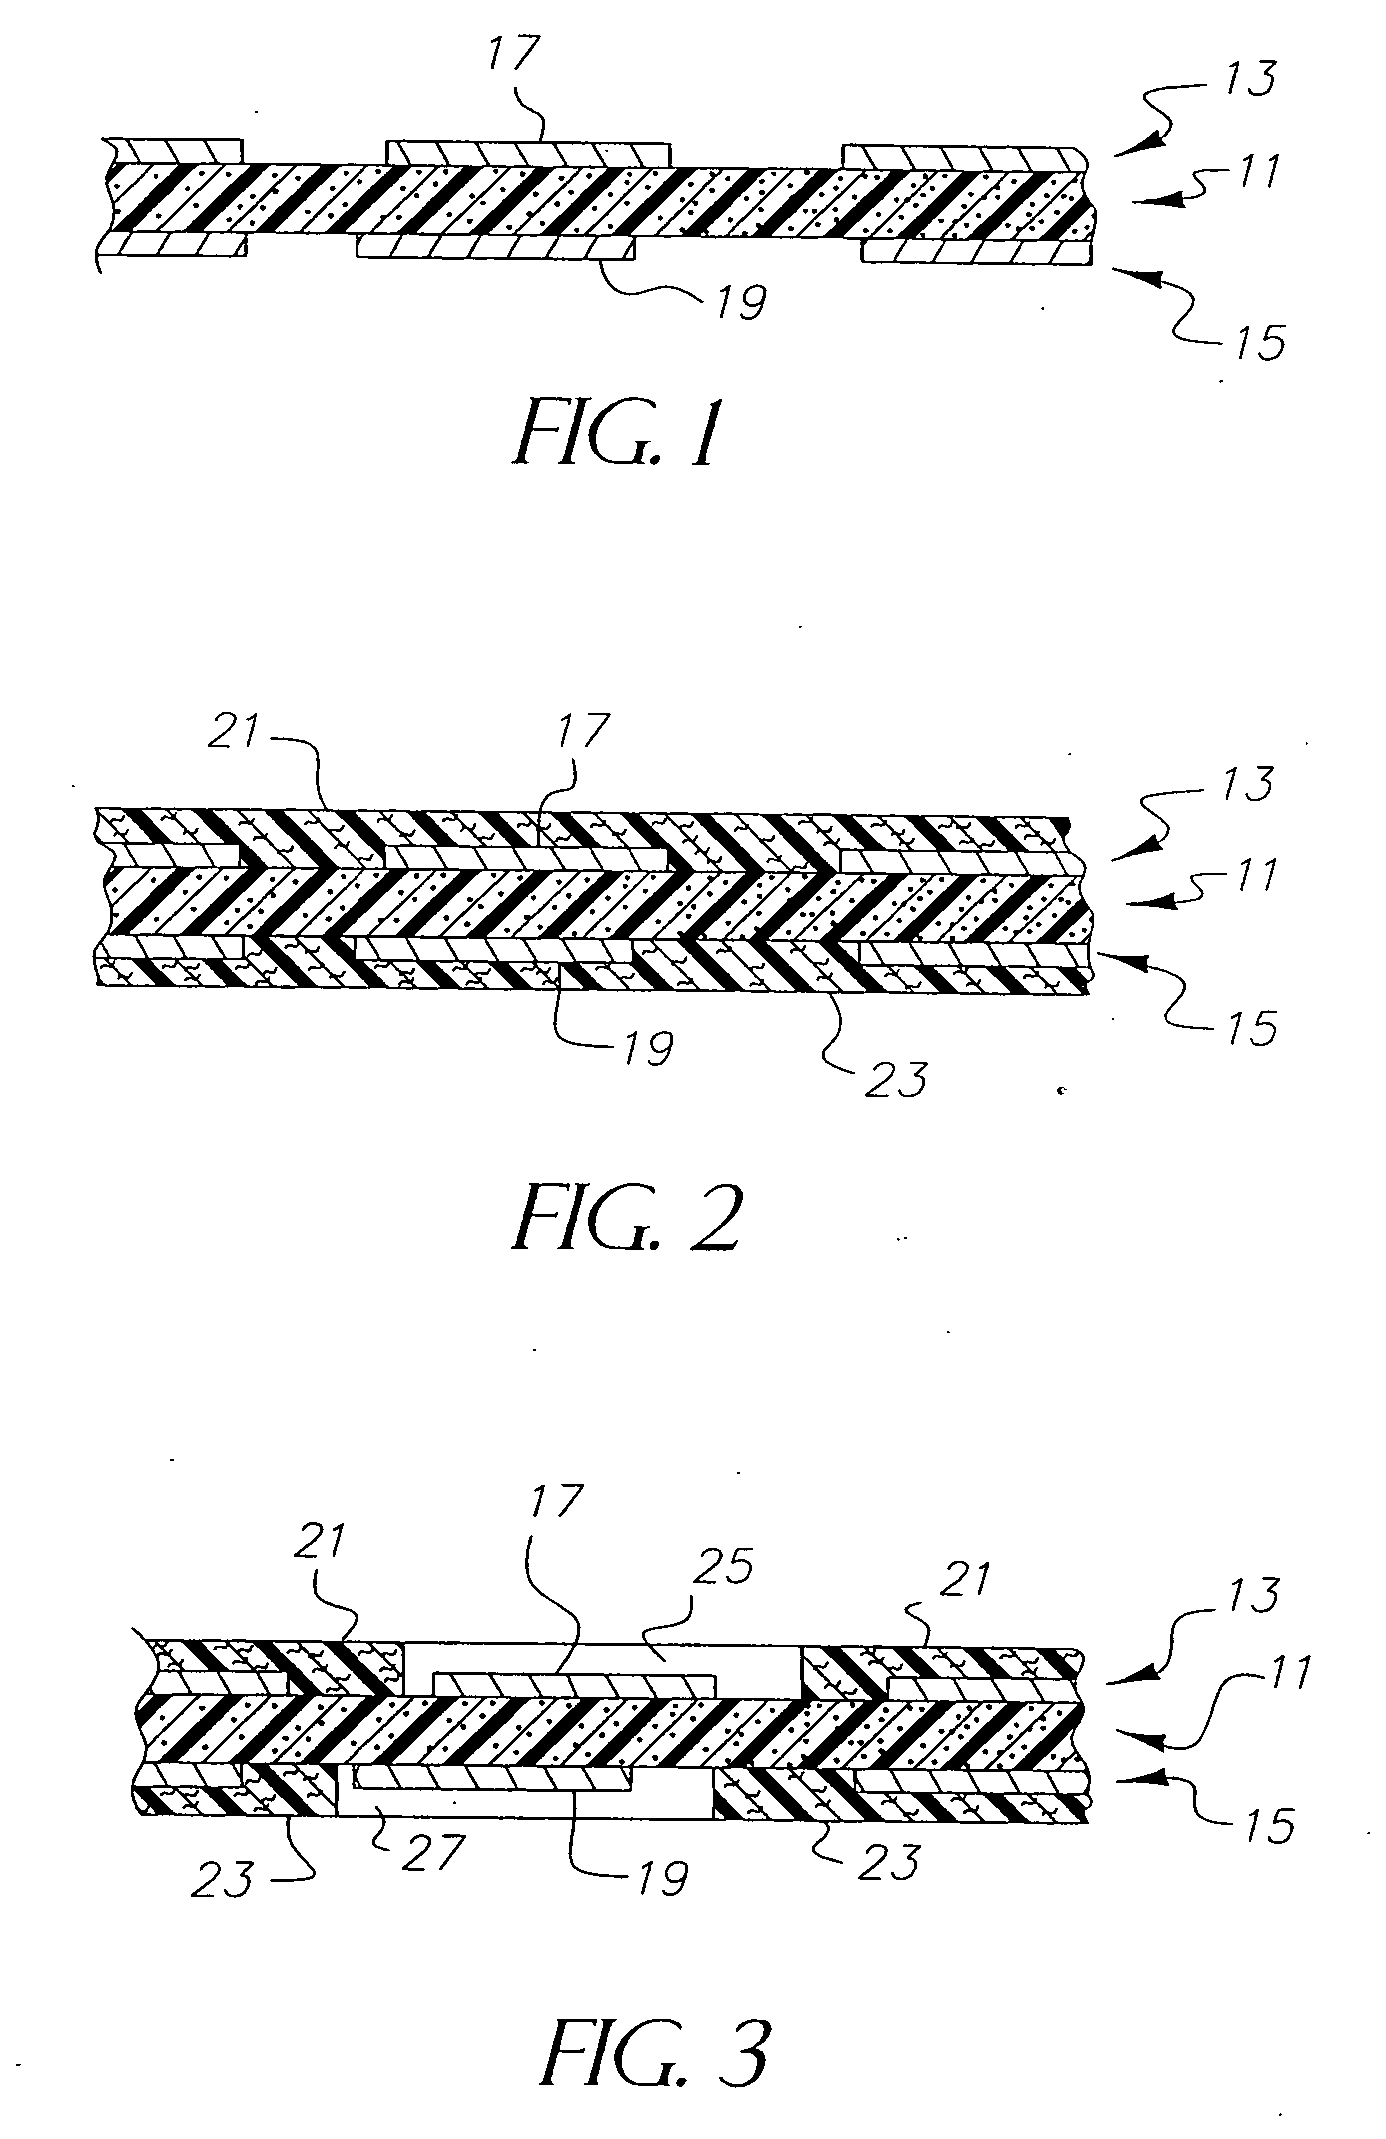 Method of making a capacitive substrate using photoimageable dielectric for use as part of a larger circuitized substrate, method of making said circuitized substrate and method of making an information handling system including said circuitized substrate